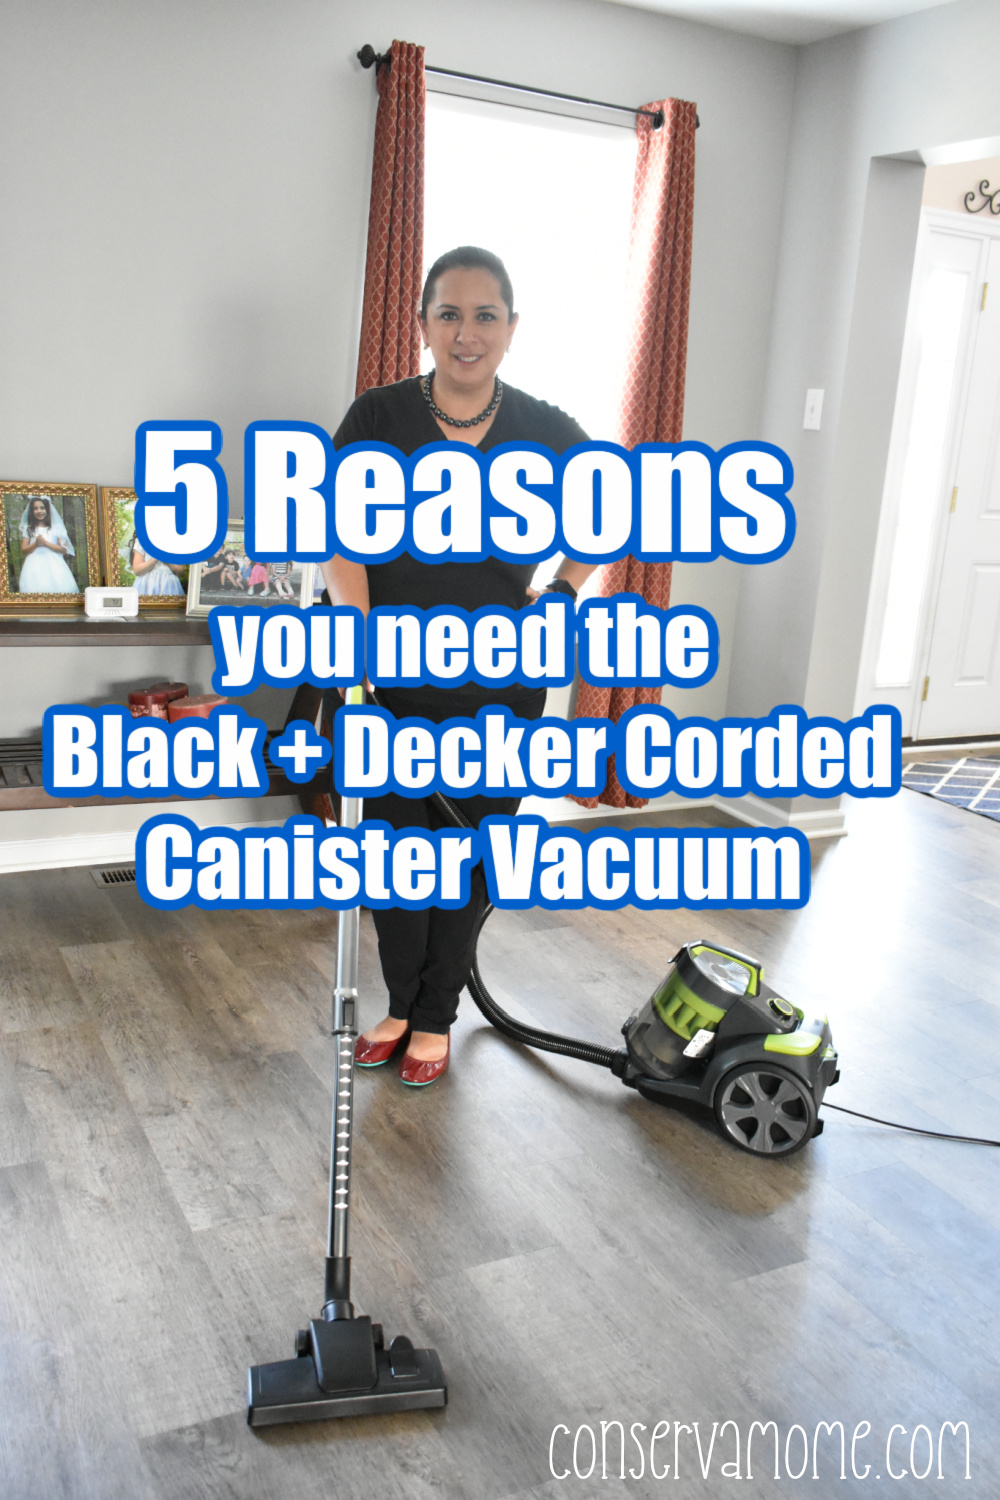 5 Reasons you need the Black + Decker Corded Canister Vacuum